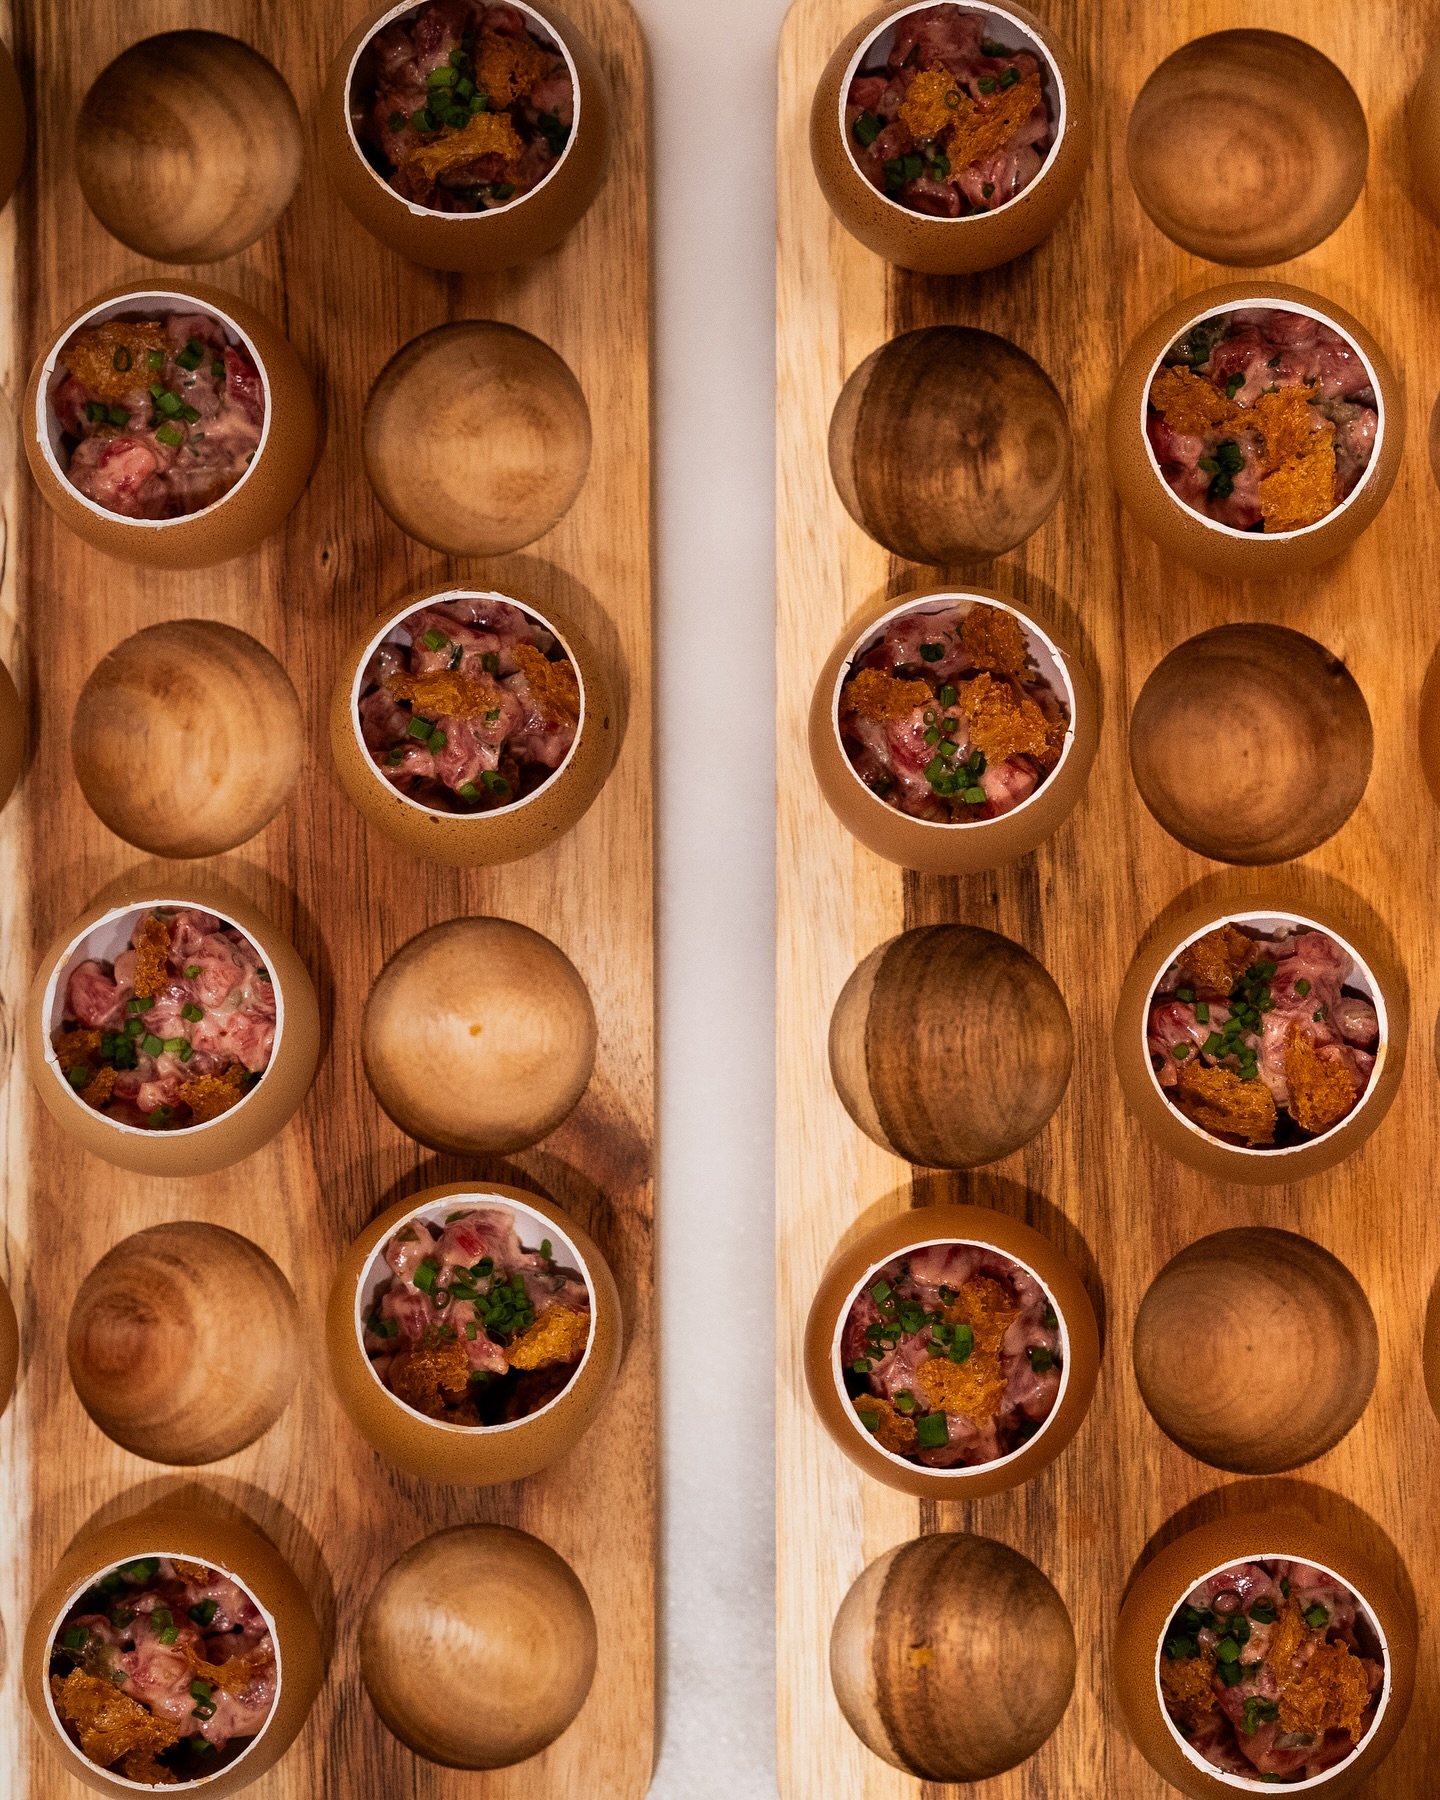 Our steak tartare canap&eacute;s with toasted sourdough and lots of egg yolk.